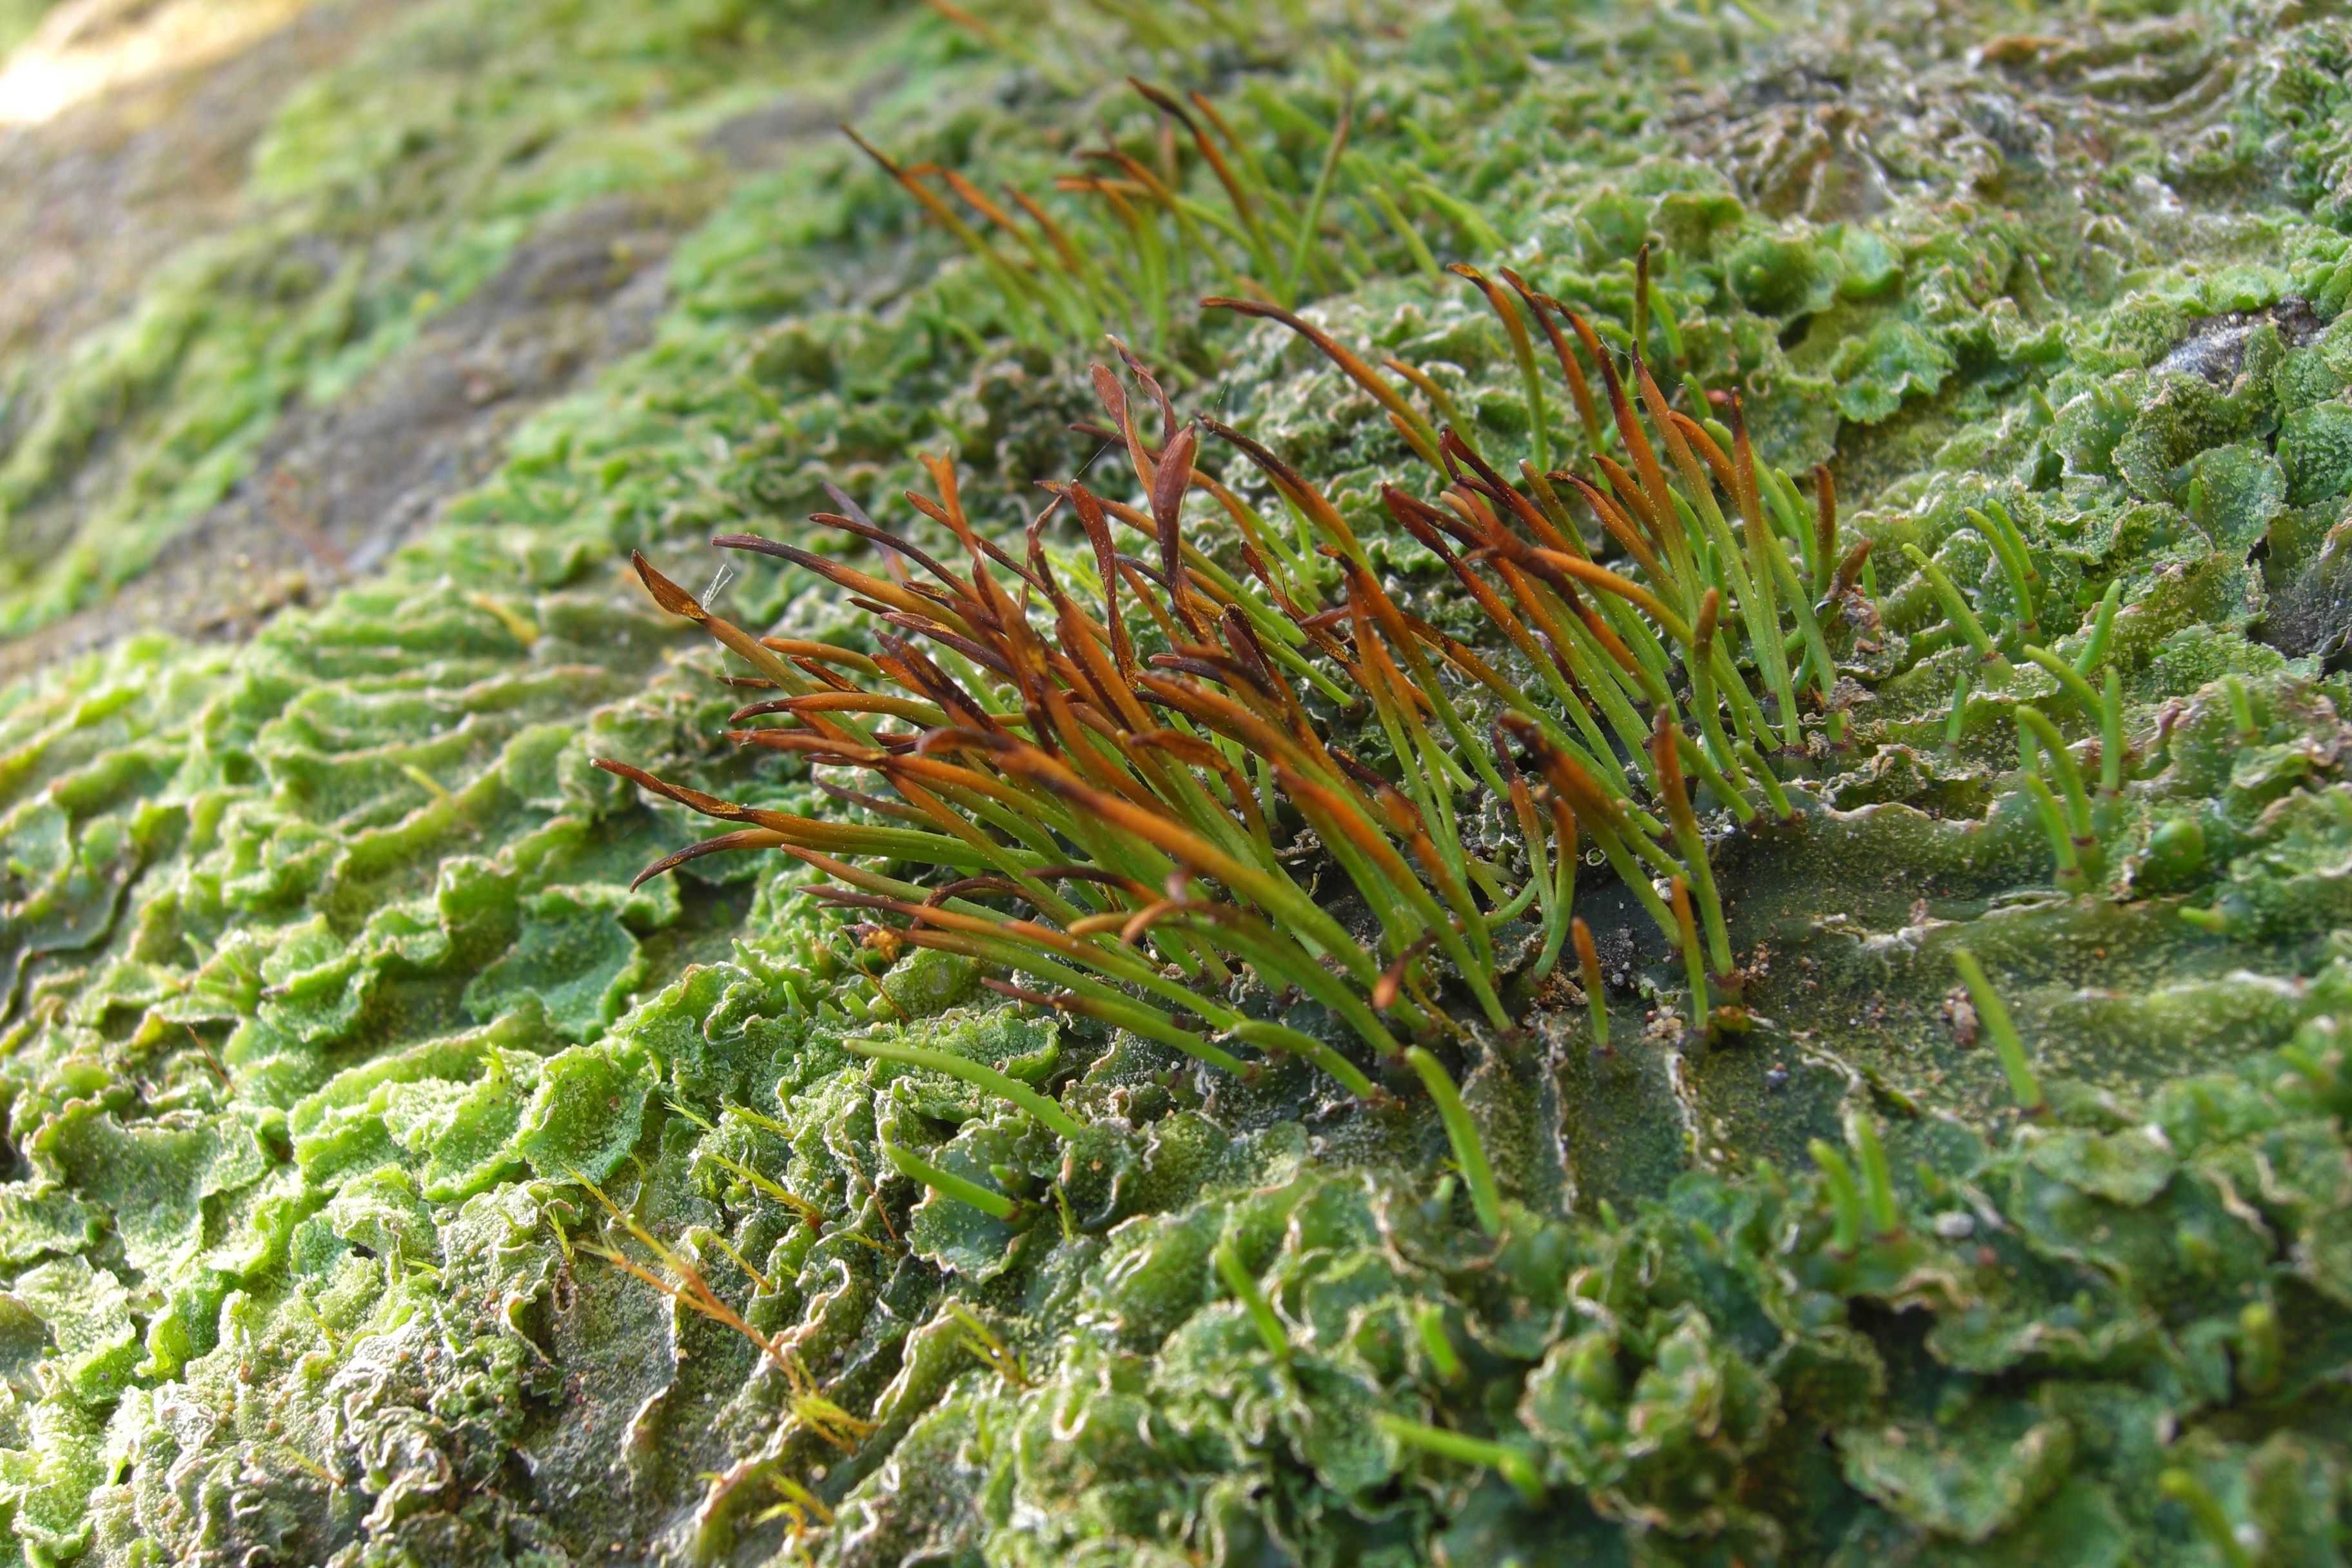 Hornworts are bryophytes that are believed to the closest living relatives of the vascular plants.